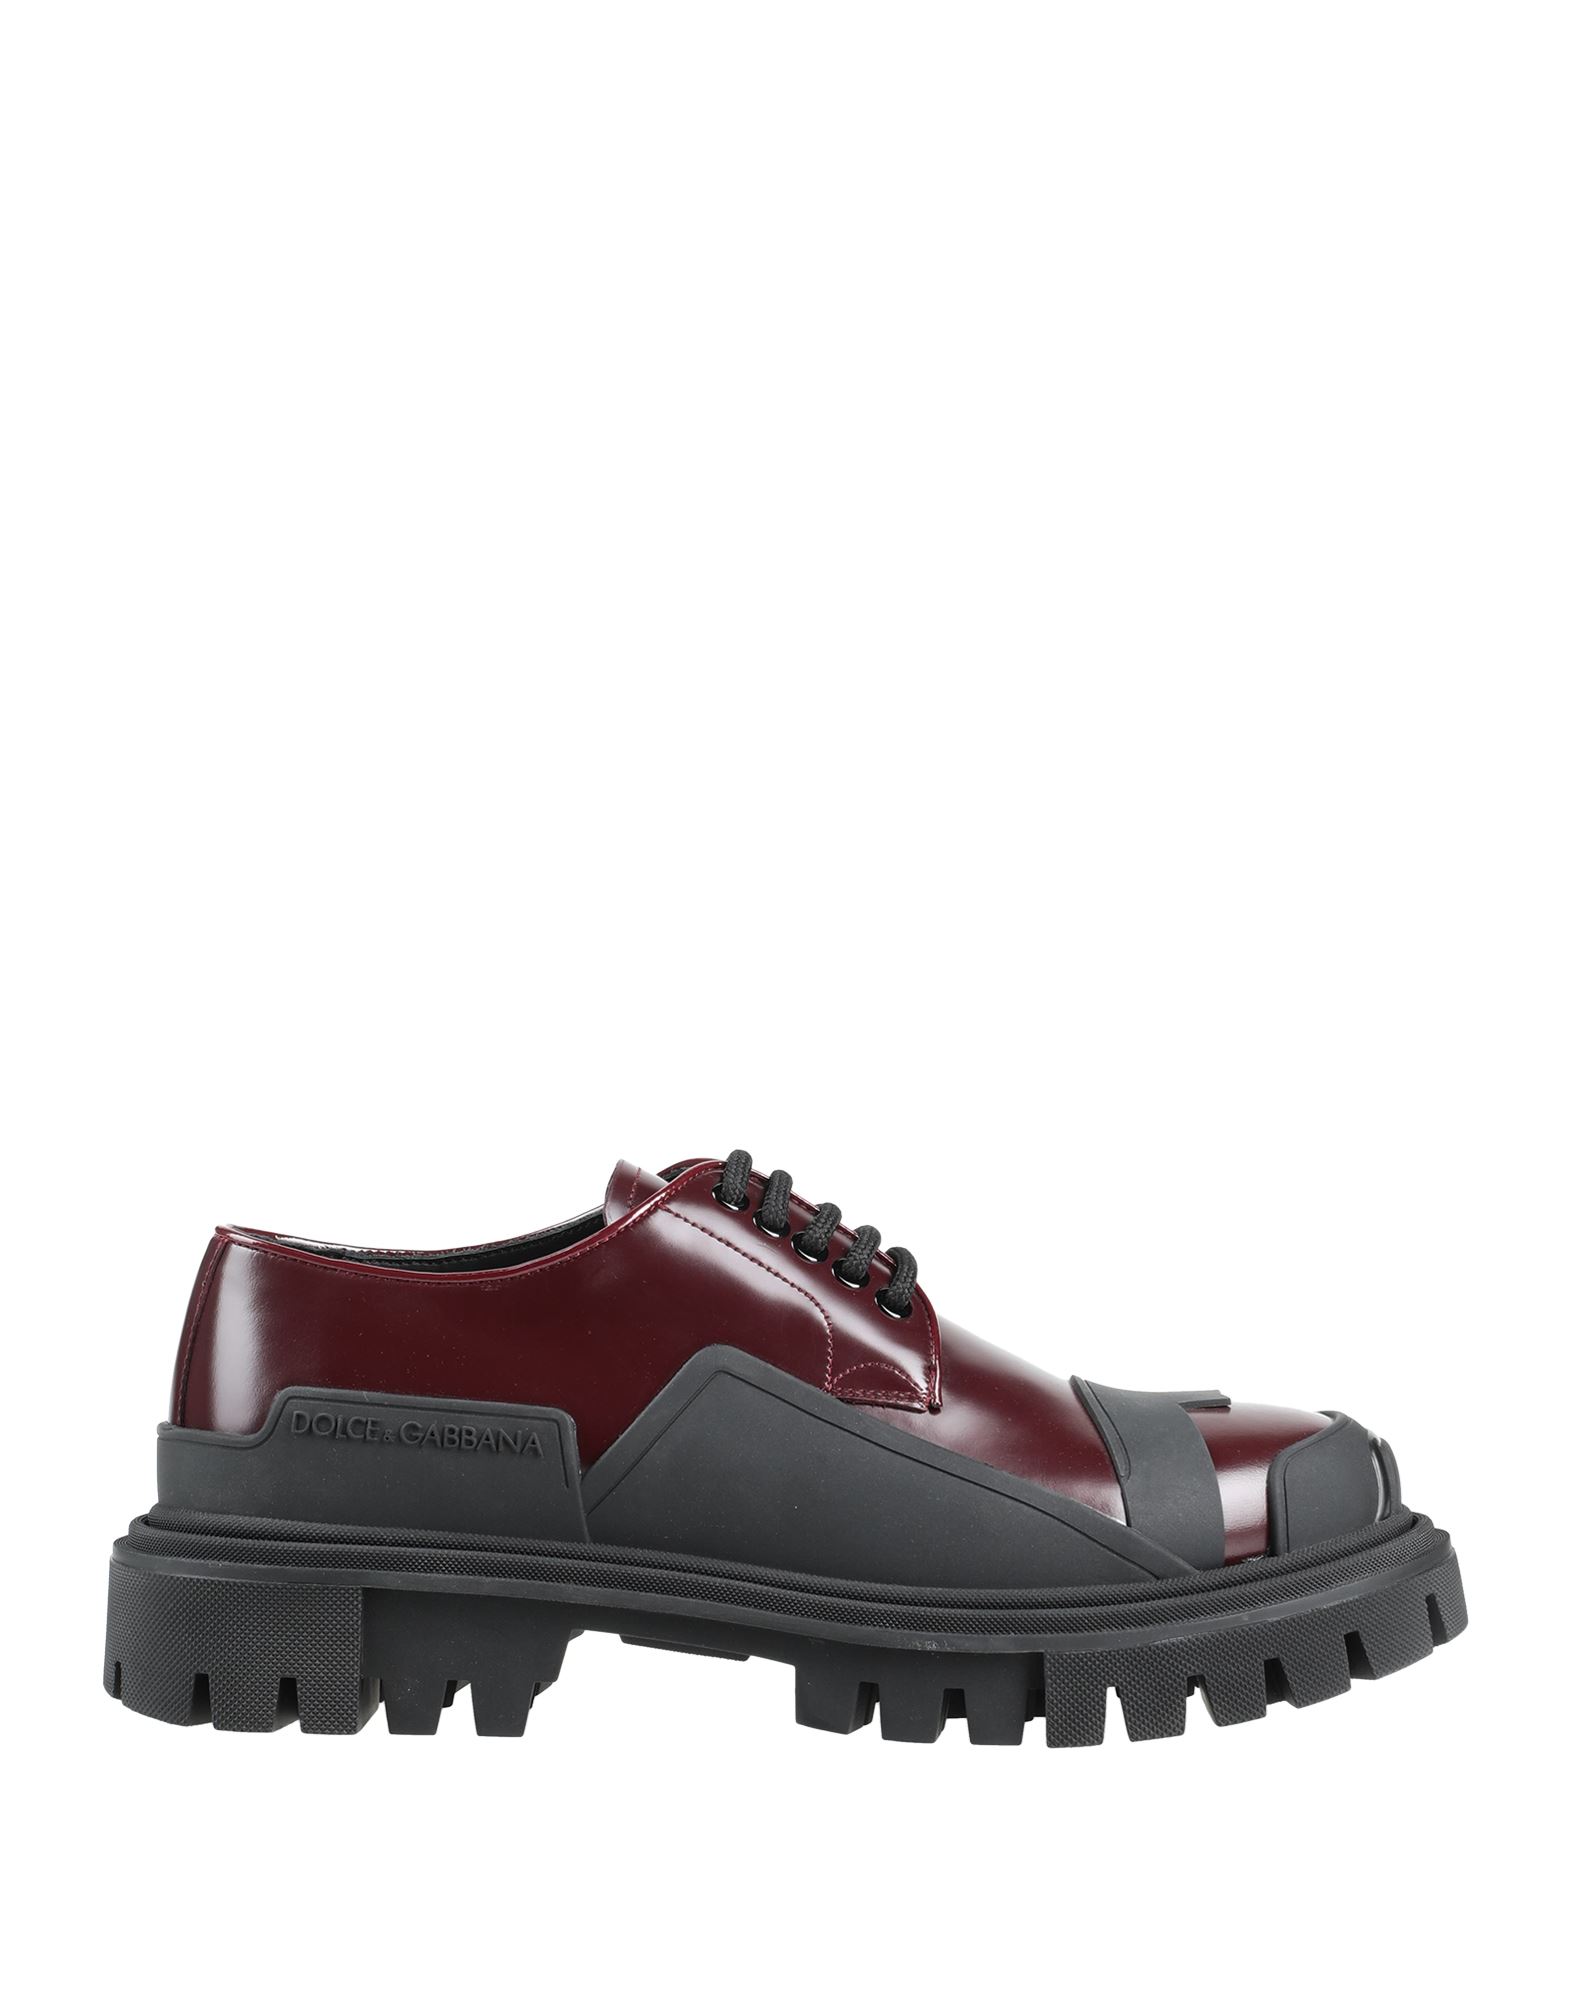 Dolce & Gabbana Lace-up Shoes In Maroon